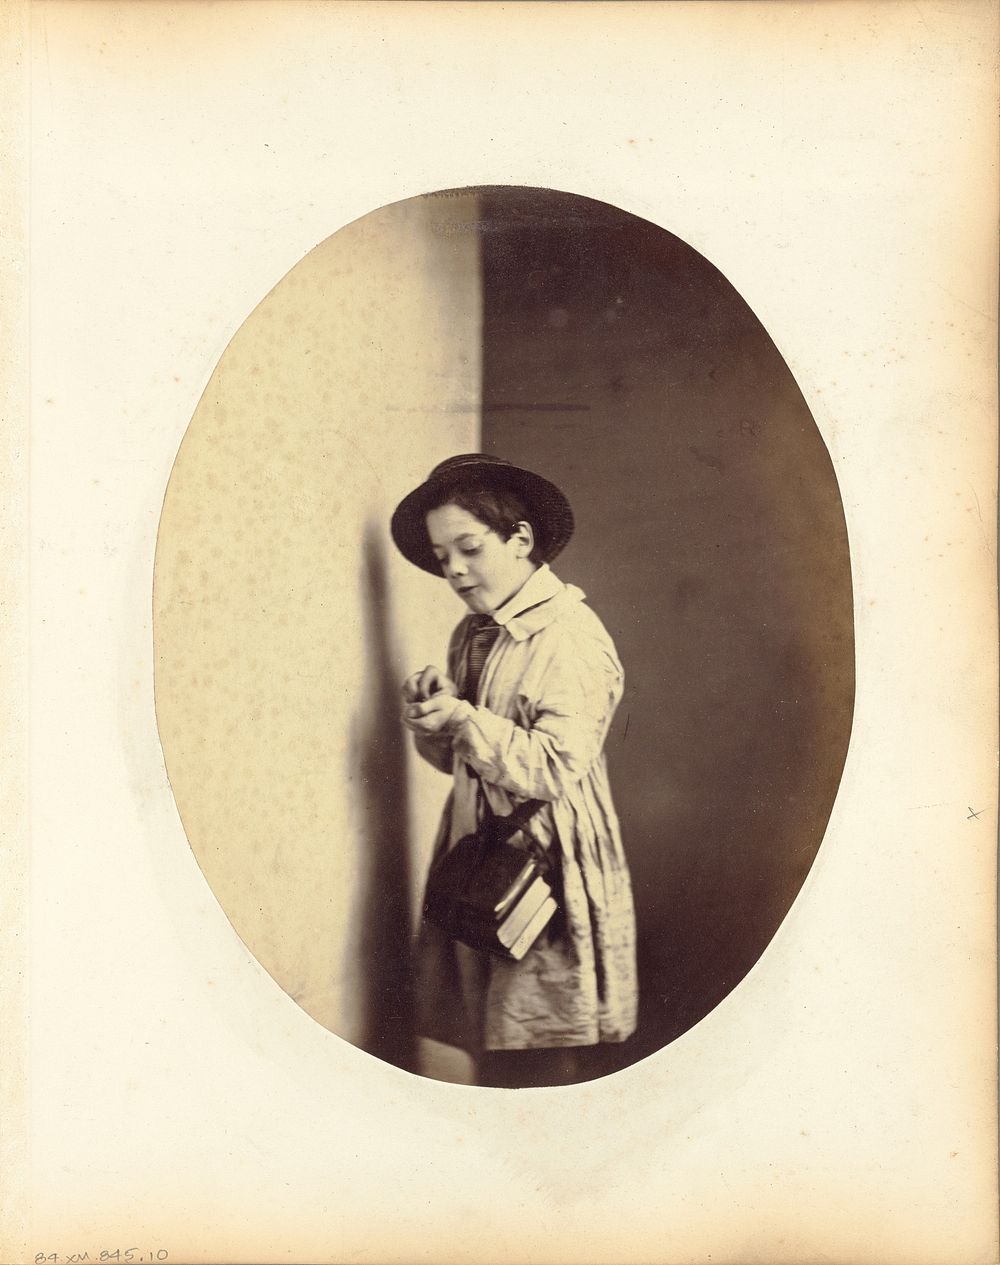 The Participles or Grammar for Little Boys: Caught by Oscar Gustave Rejlander